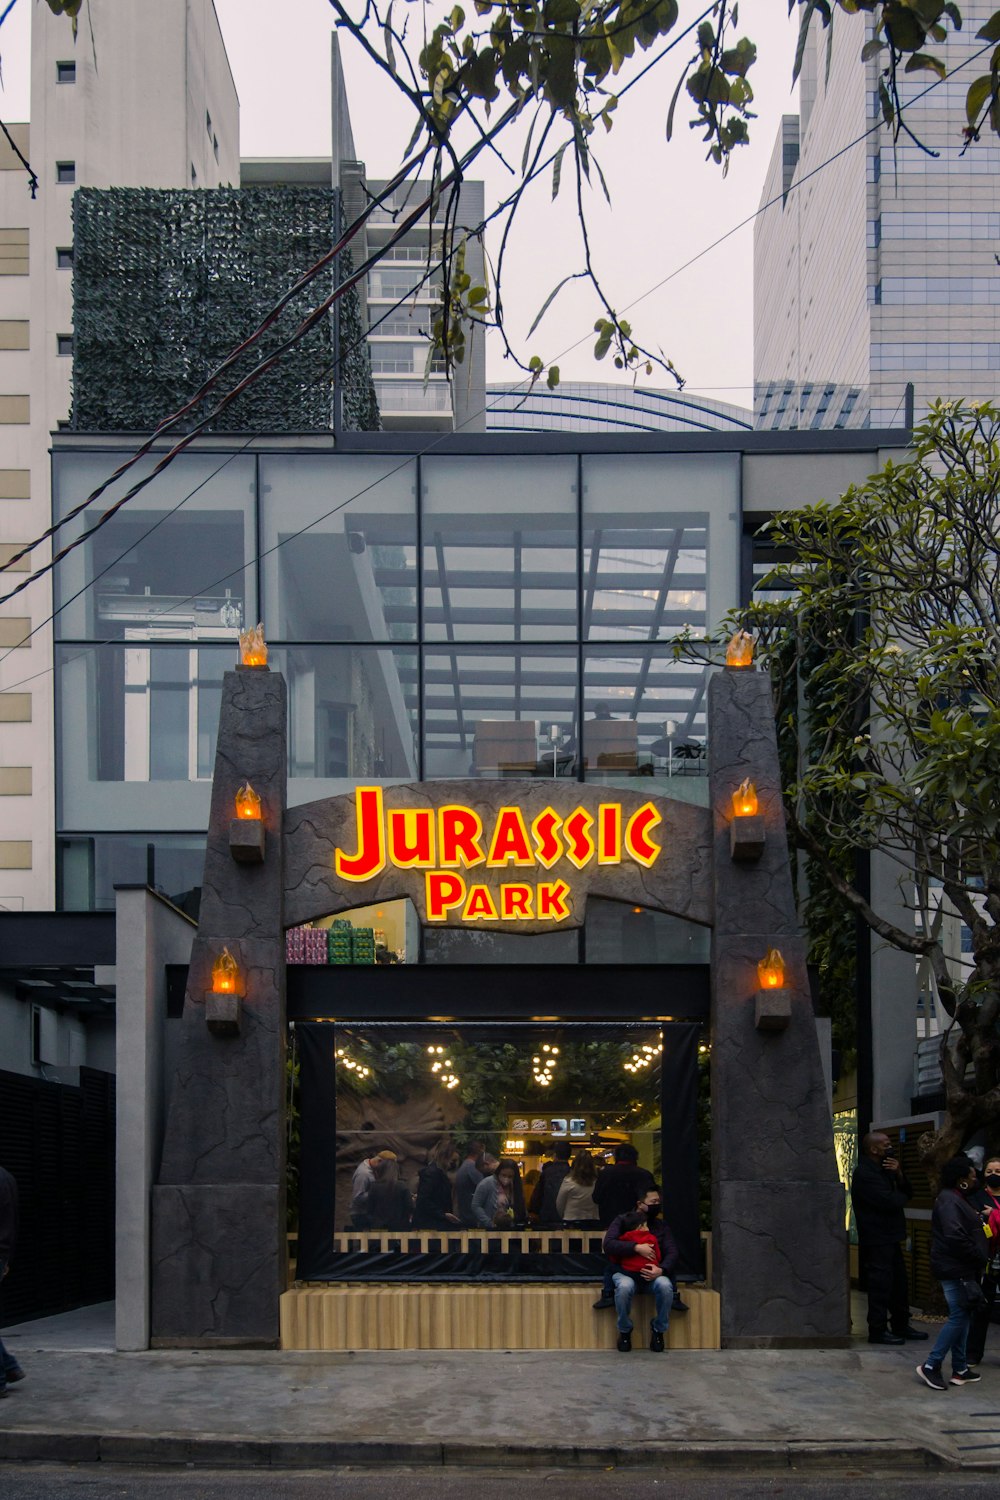 the entrance to the jurasic park in the city